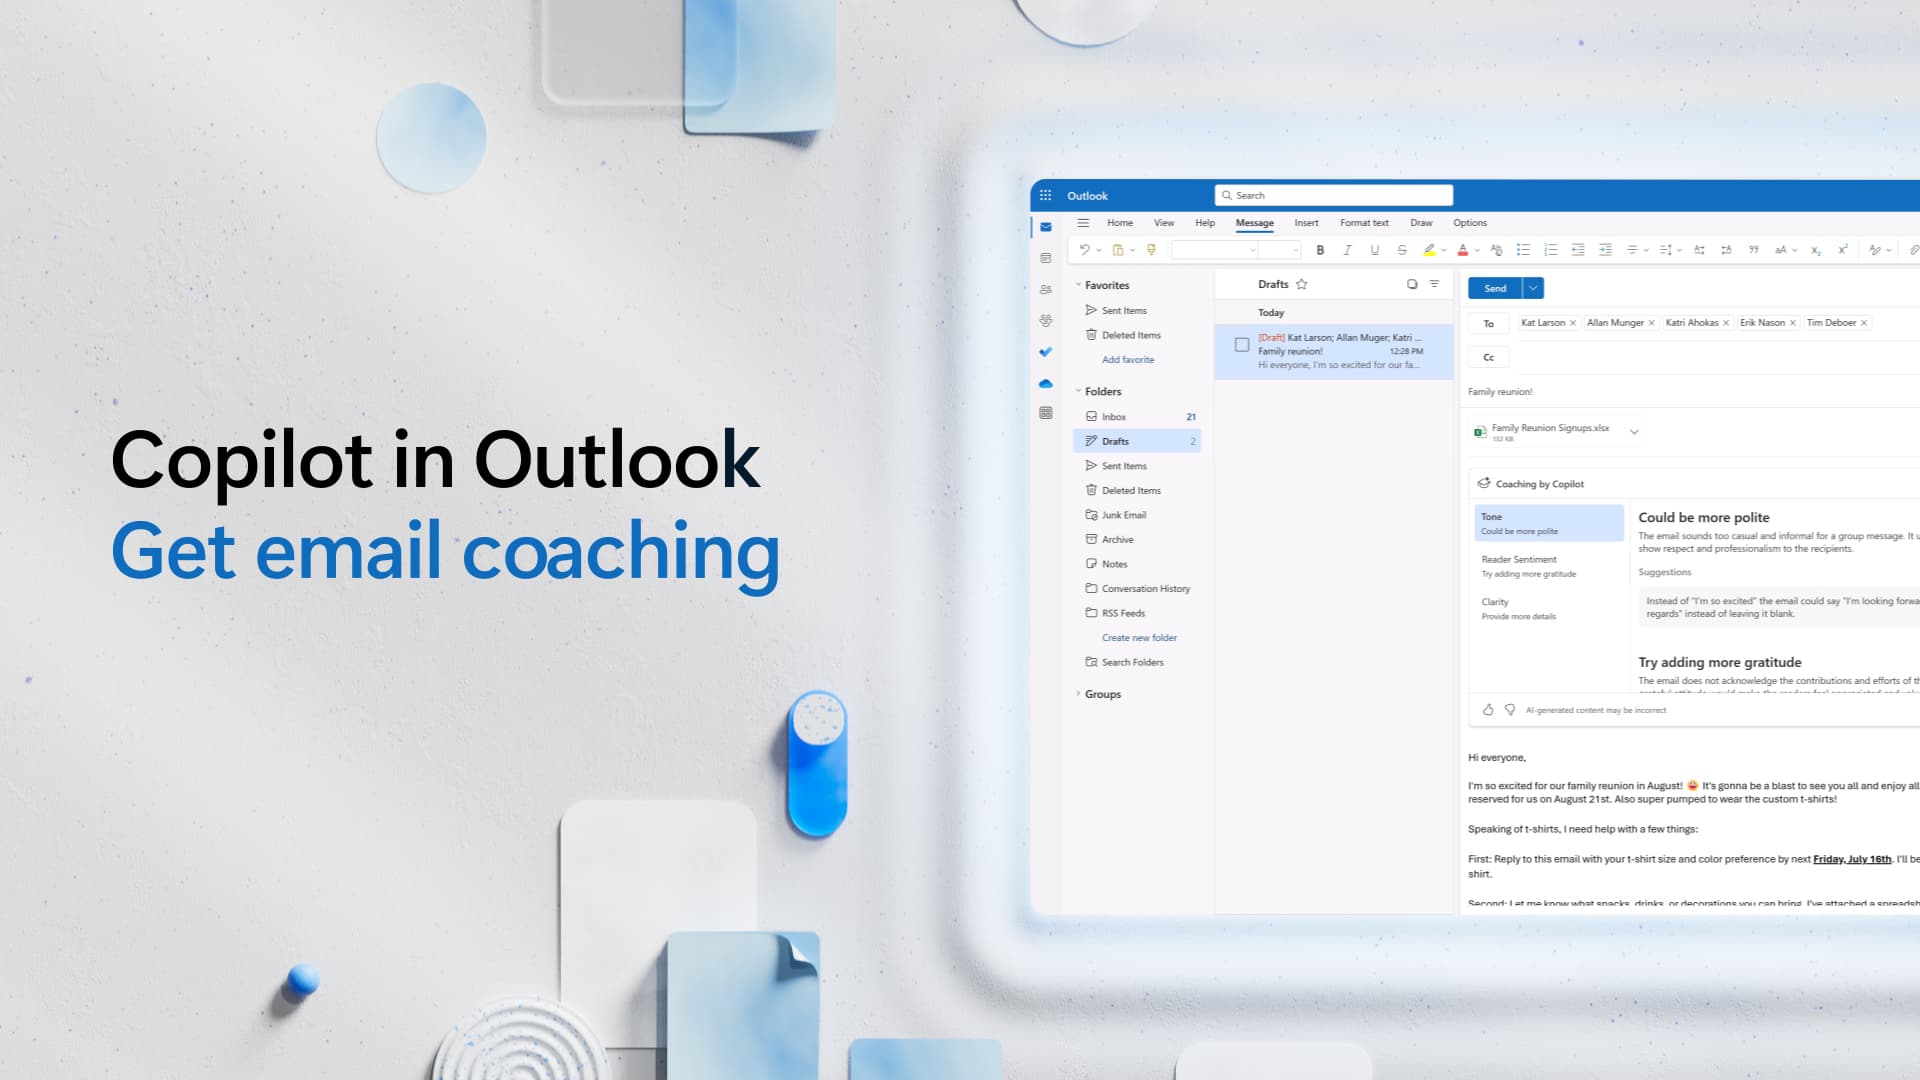 Video: Get email coaching